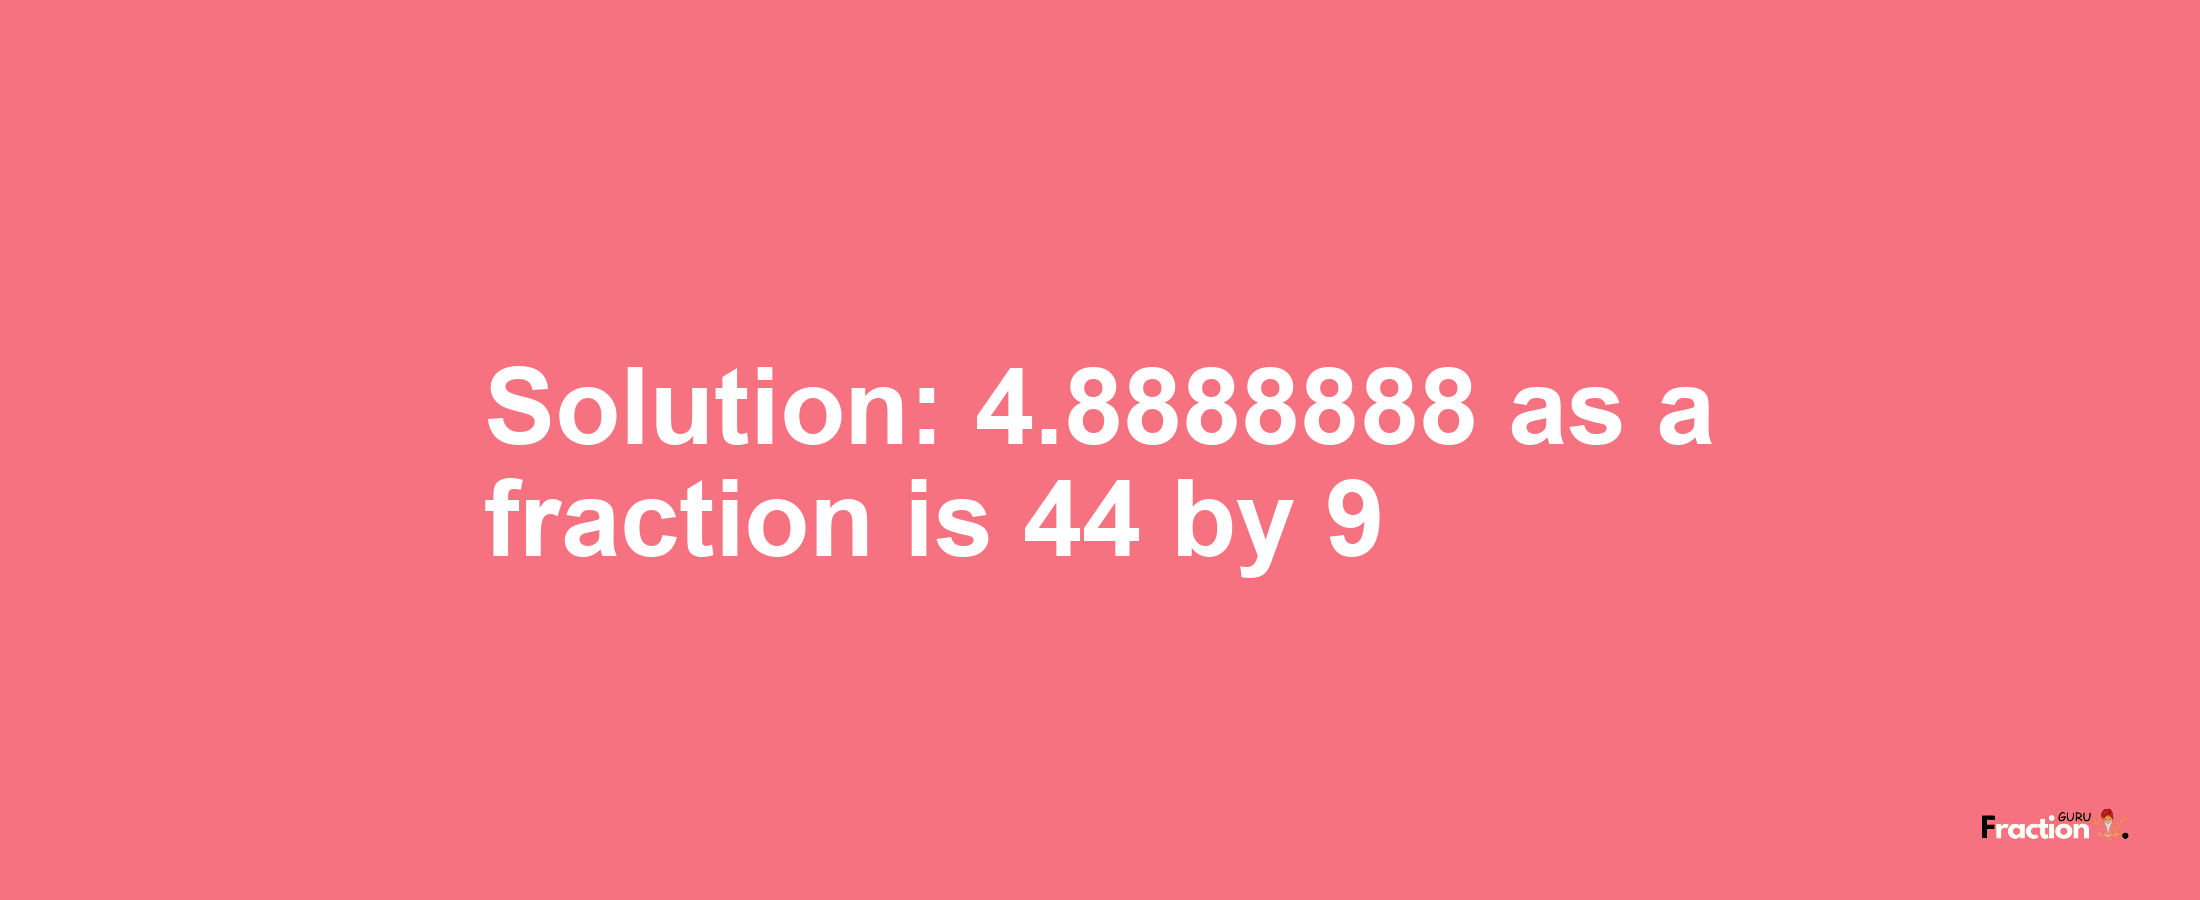 Solution:4.8888888 as a fraction is 44/9